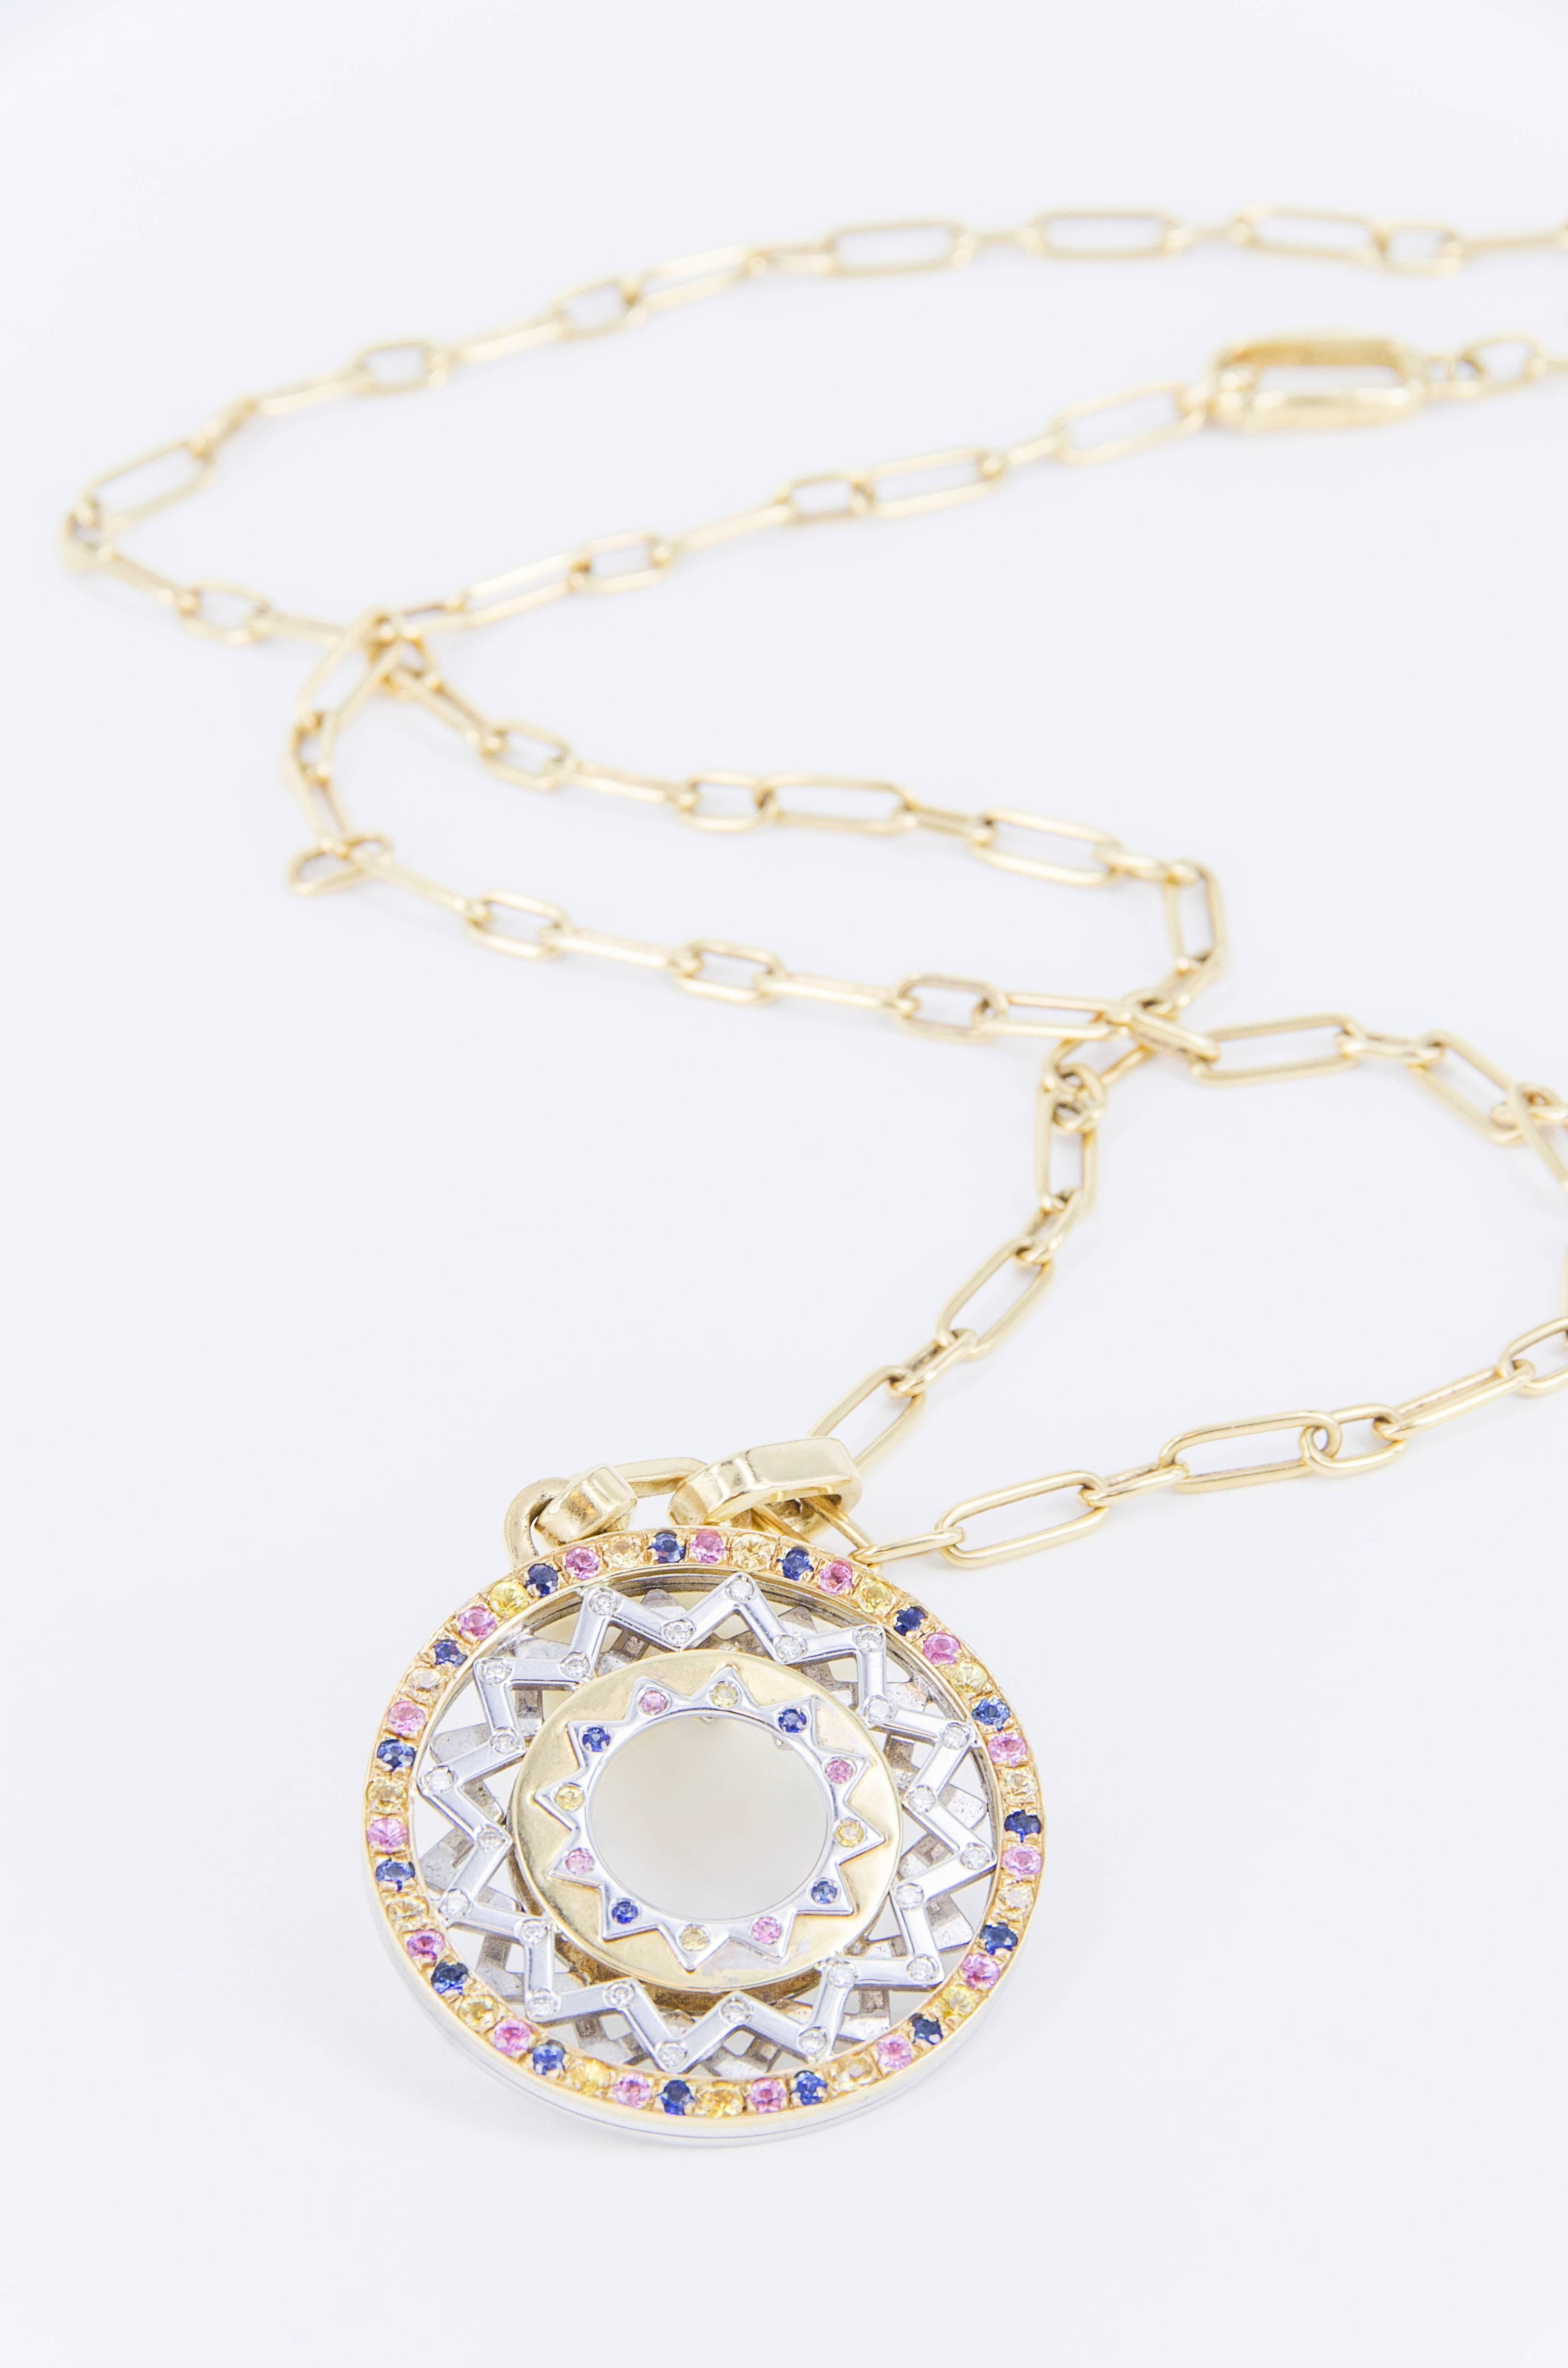 Pendant designed by Anna Gili, edited by Nicolis Cola in 2001. White and yellow gold, 24 white brilliants (0,24 ct.), 57 yellow, pink and blue sapphires (1,86 ct.). 